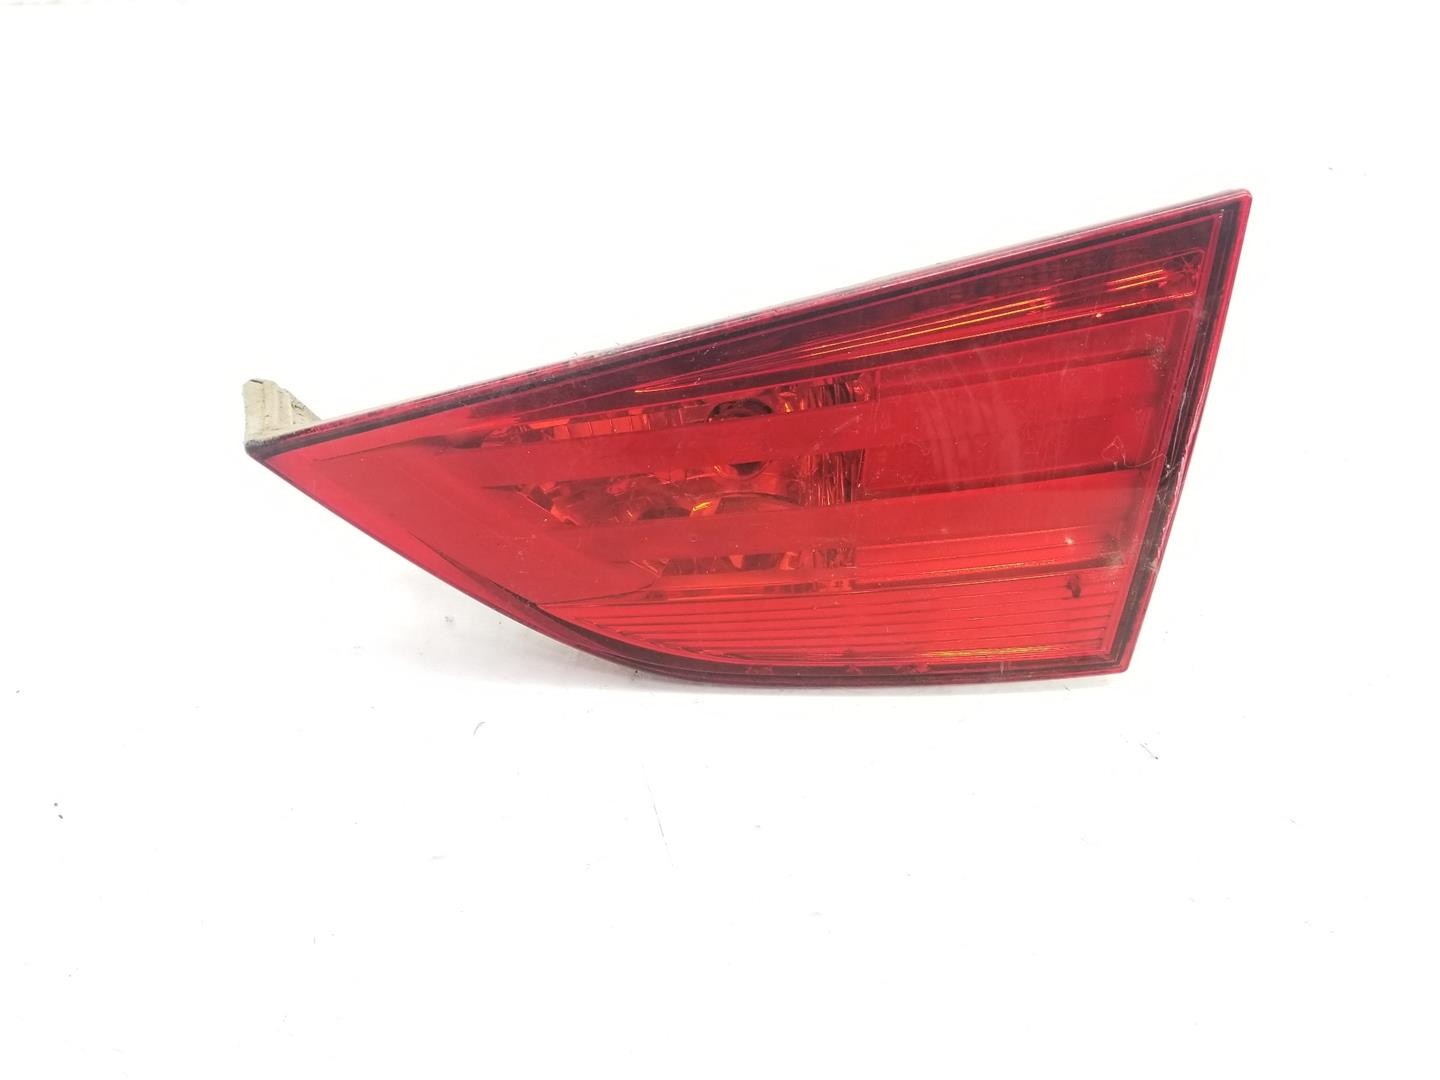 BMW X1 E84 (2009-2015) Rear Right Taillight Lamp 63212992480, 63212992480, 2222DL 24122756